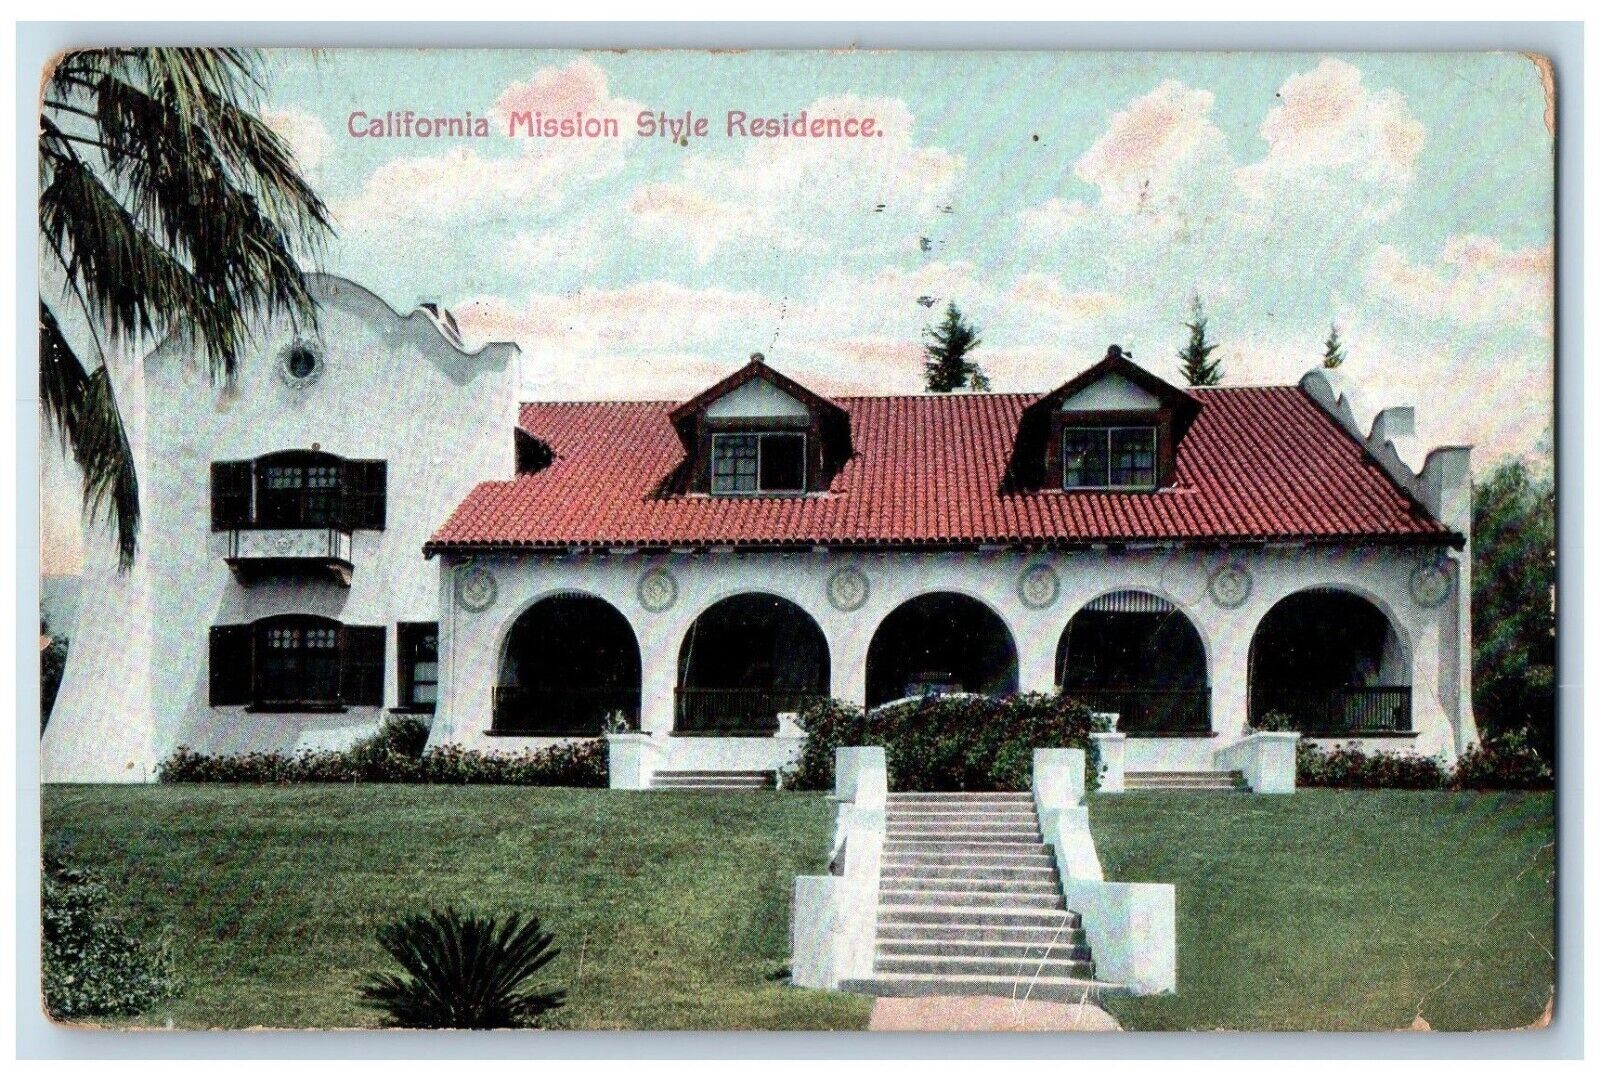 1908 Los Angeles California CA, Home Mission Style Residence Entrance Postcard